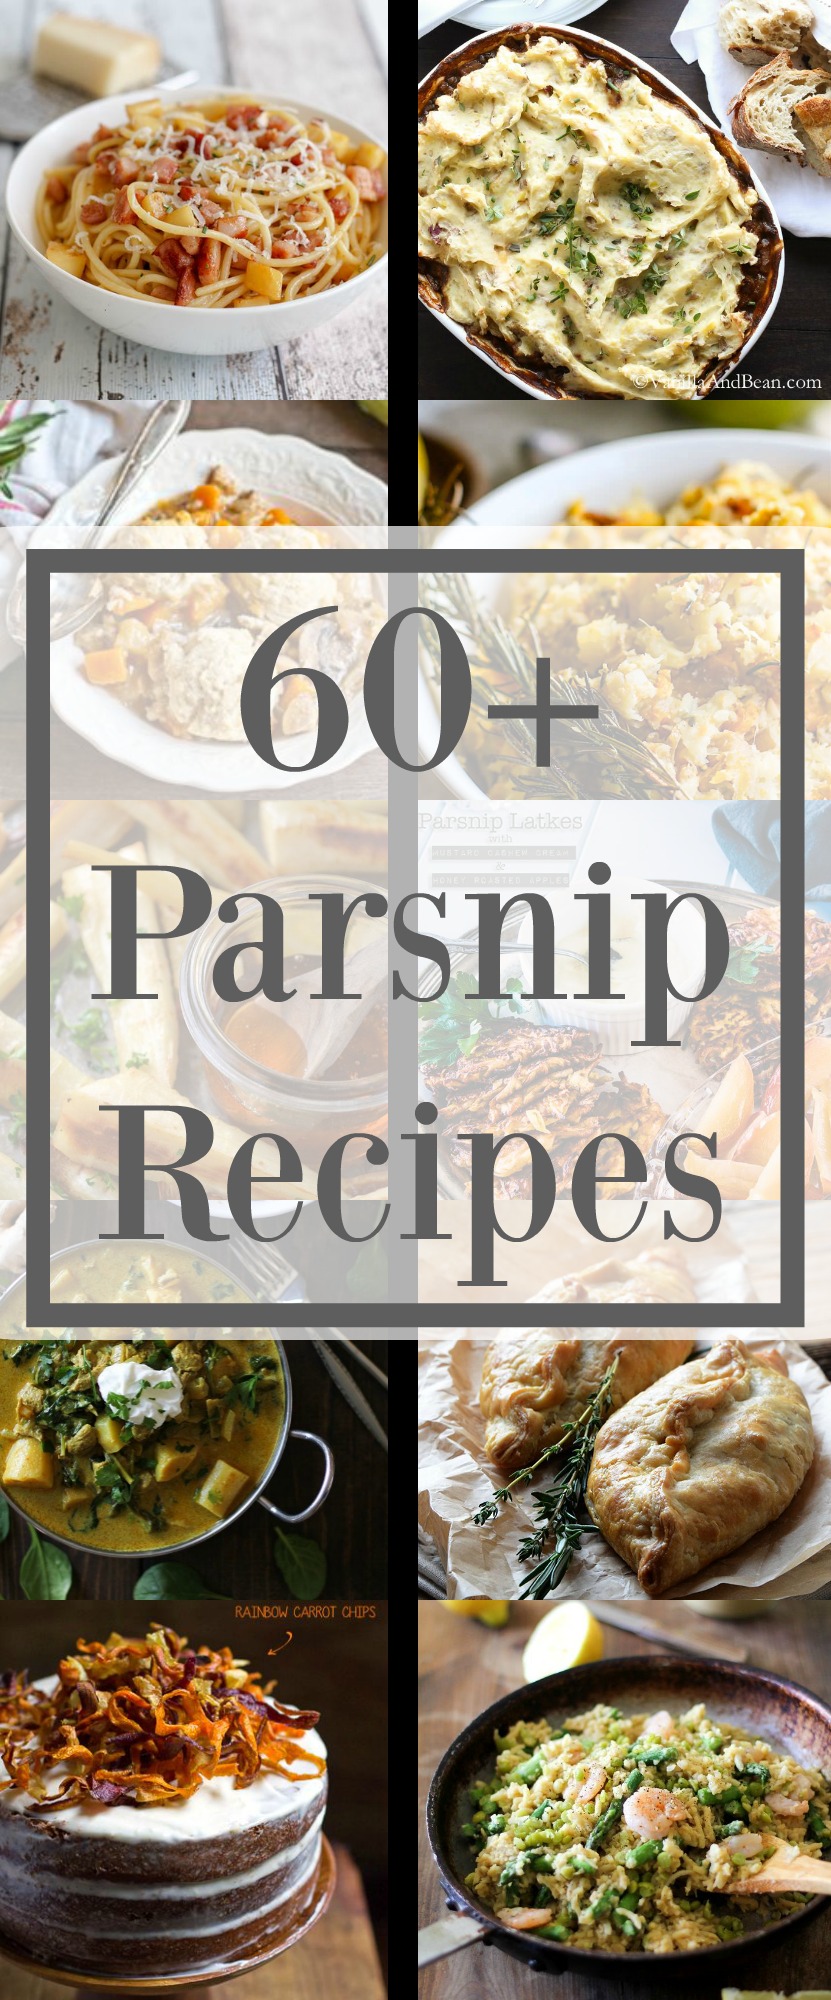 When Parsnips are in season you need only 1 list of recipes and it is this one! Here are 60+ of the Greatest Recipes for Parsnips around the web. 